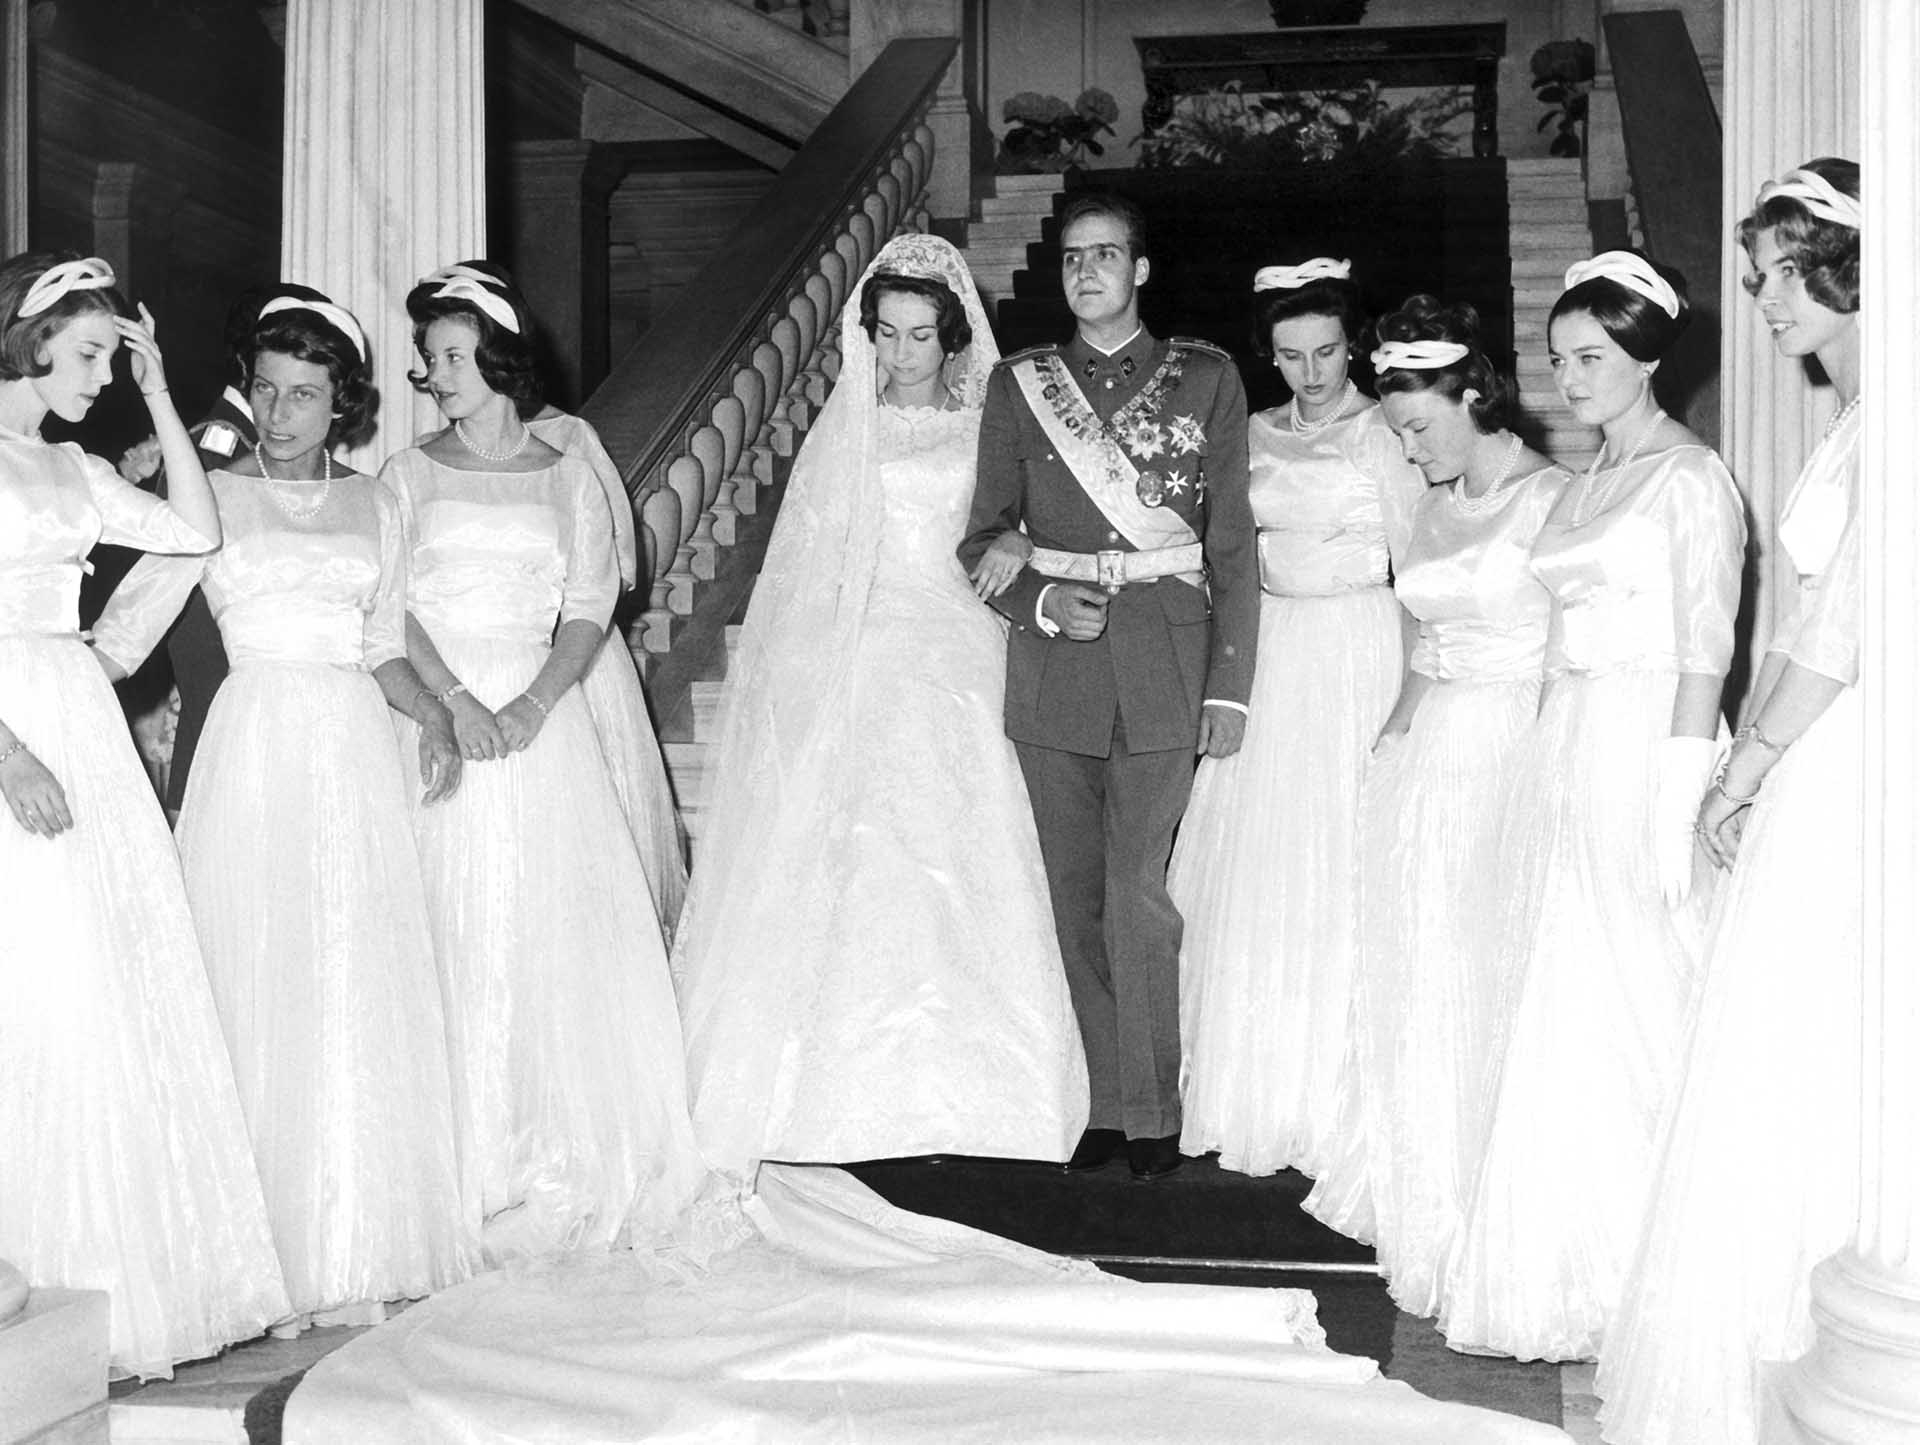 The newlyweds with the bridesmaids in the Palace of Athens. On May 14, 1962, Princess Sophia of Greece and Don Juan Carlos of Asturias, who later became the royal couple of Spain, tied the knot. Because of the different creeds, the rite was performed in two ceremonies, both Catholic and Greek Orthodox. +++(c) dpa - Report+++ [dpa picture archive]